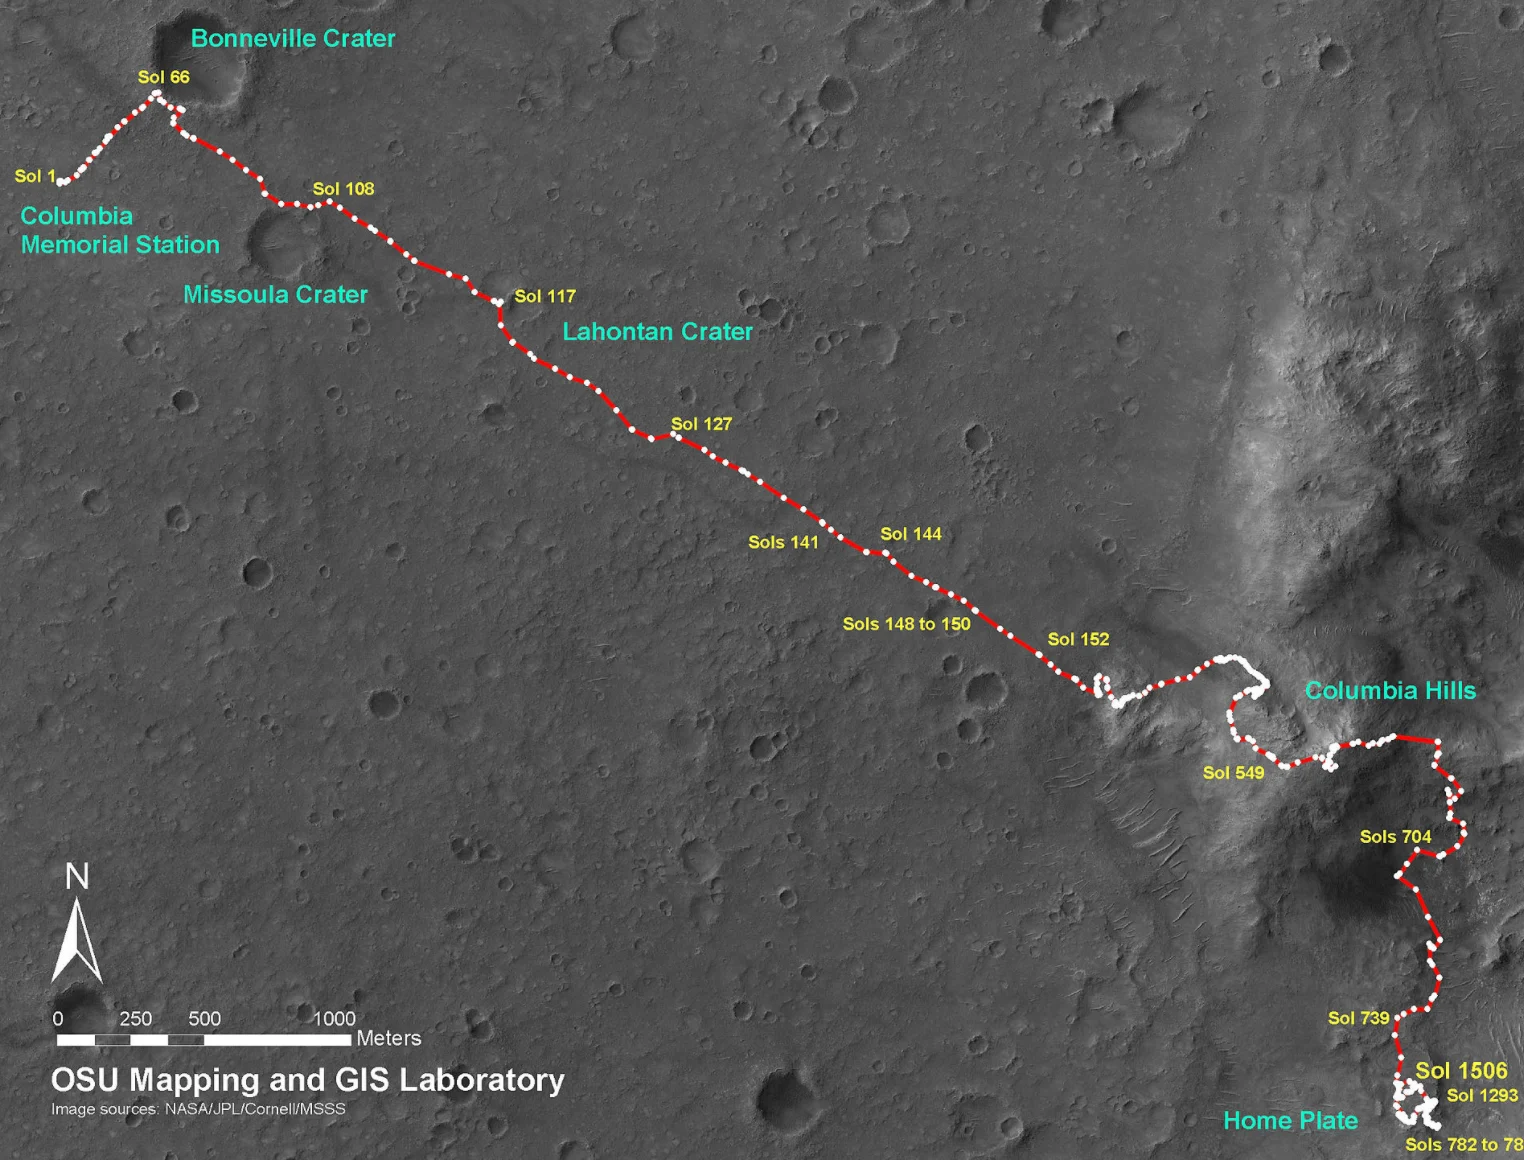 Map of the movement of the Spirit rover up to 2008.